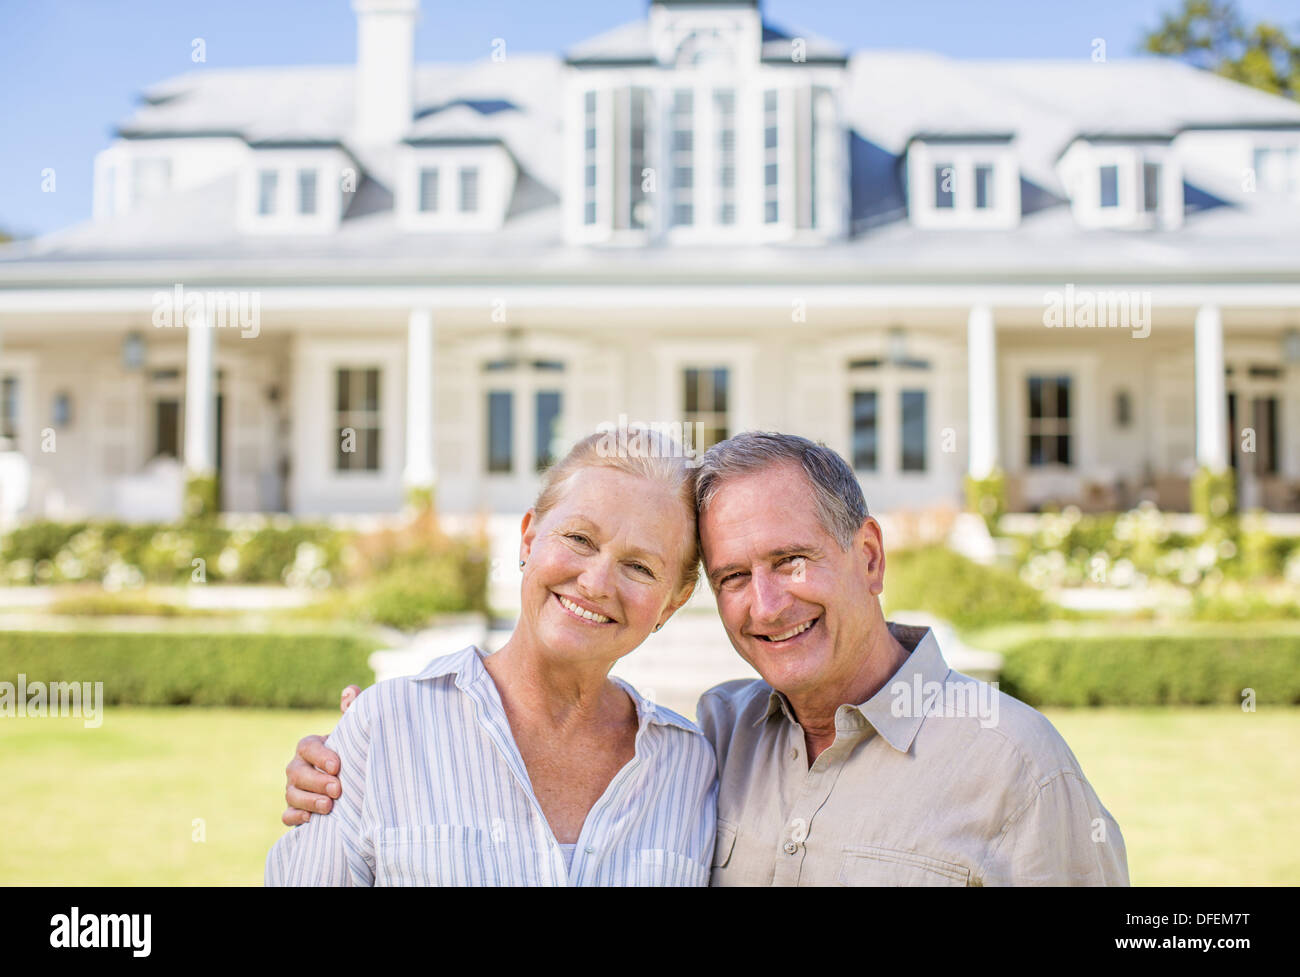 Portrait of smiling senior couple in front of house Stock Photo